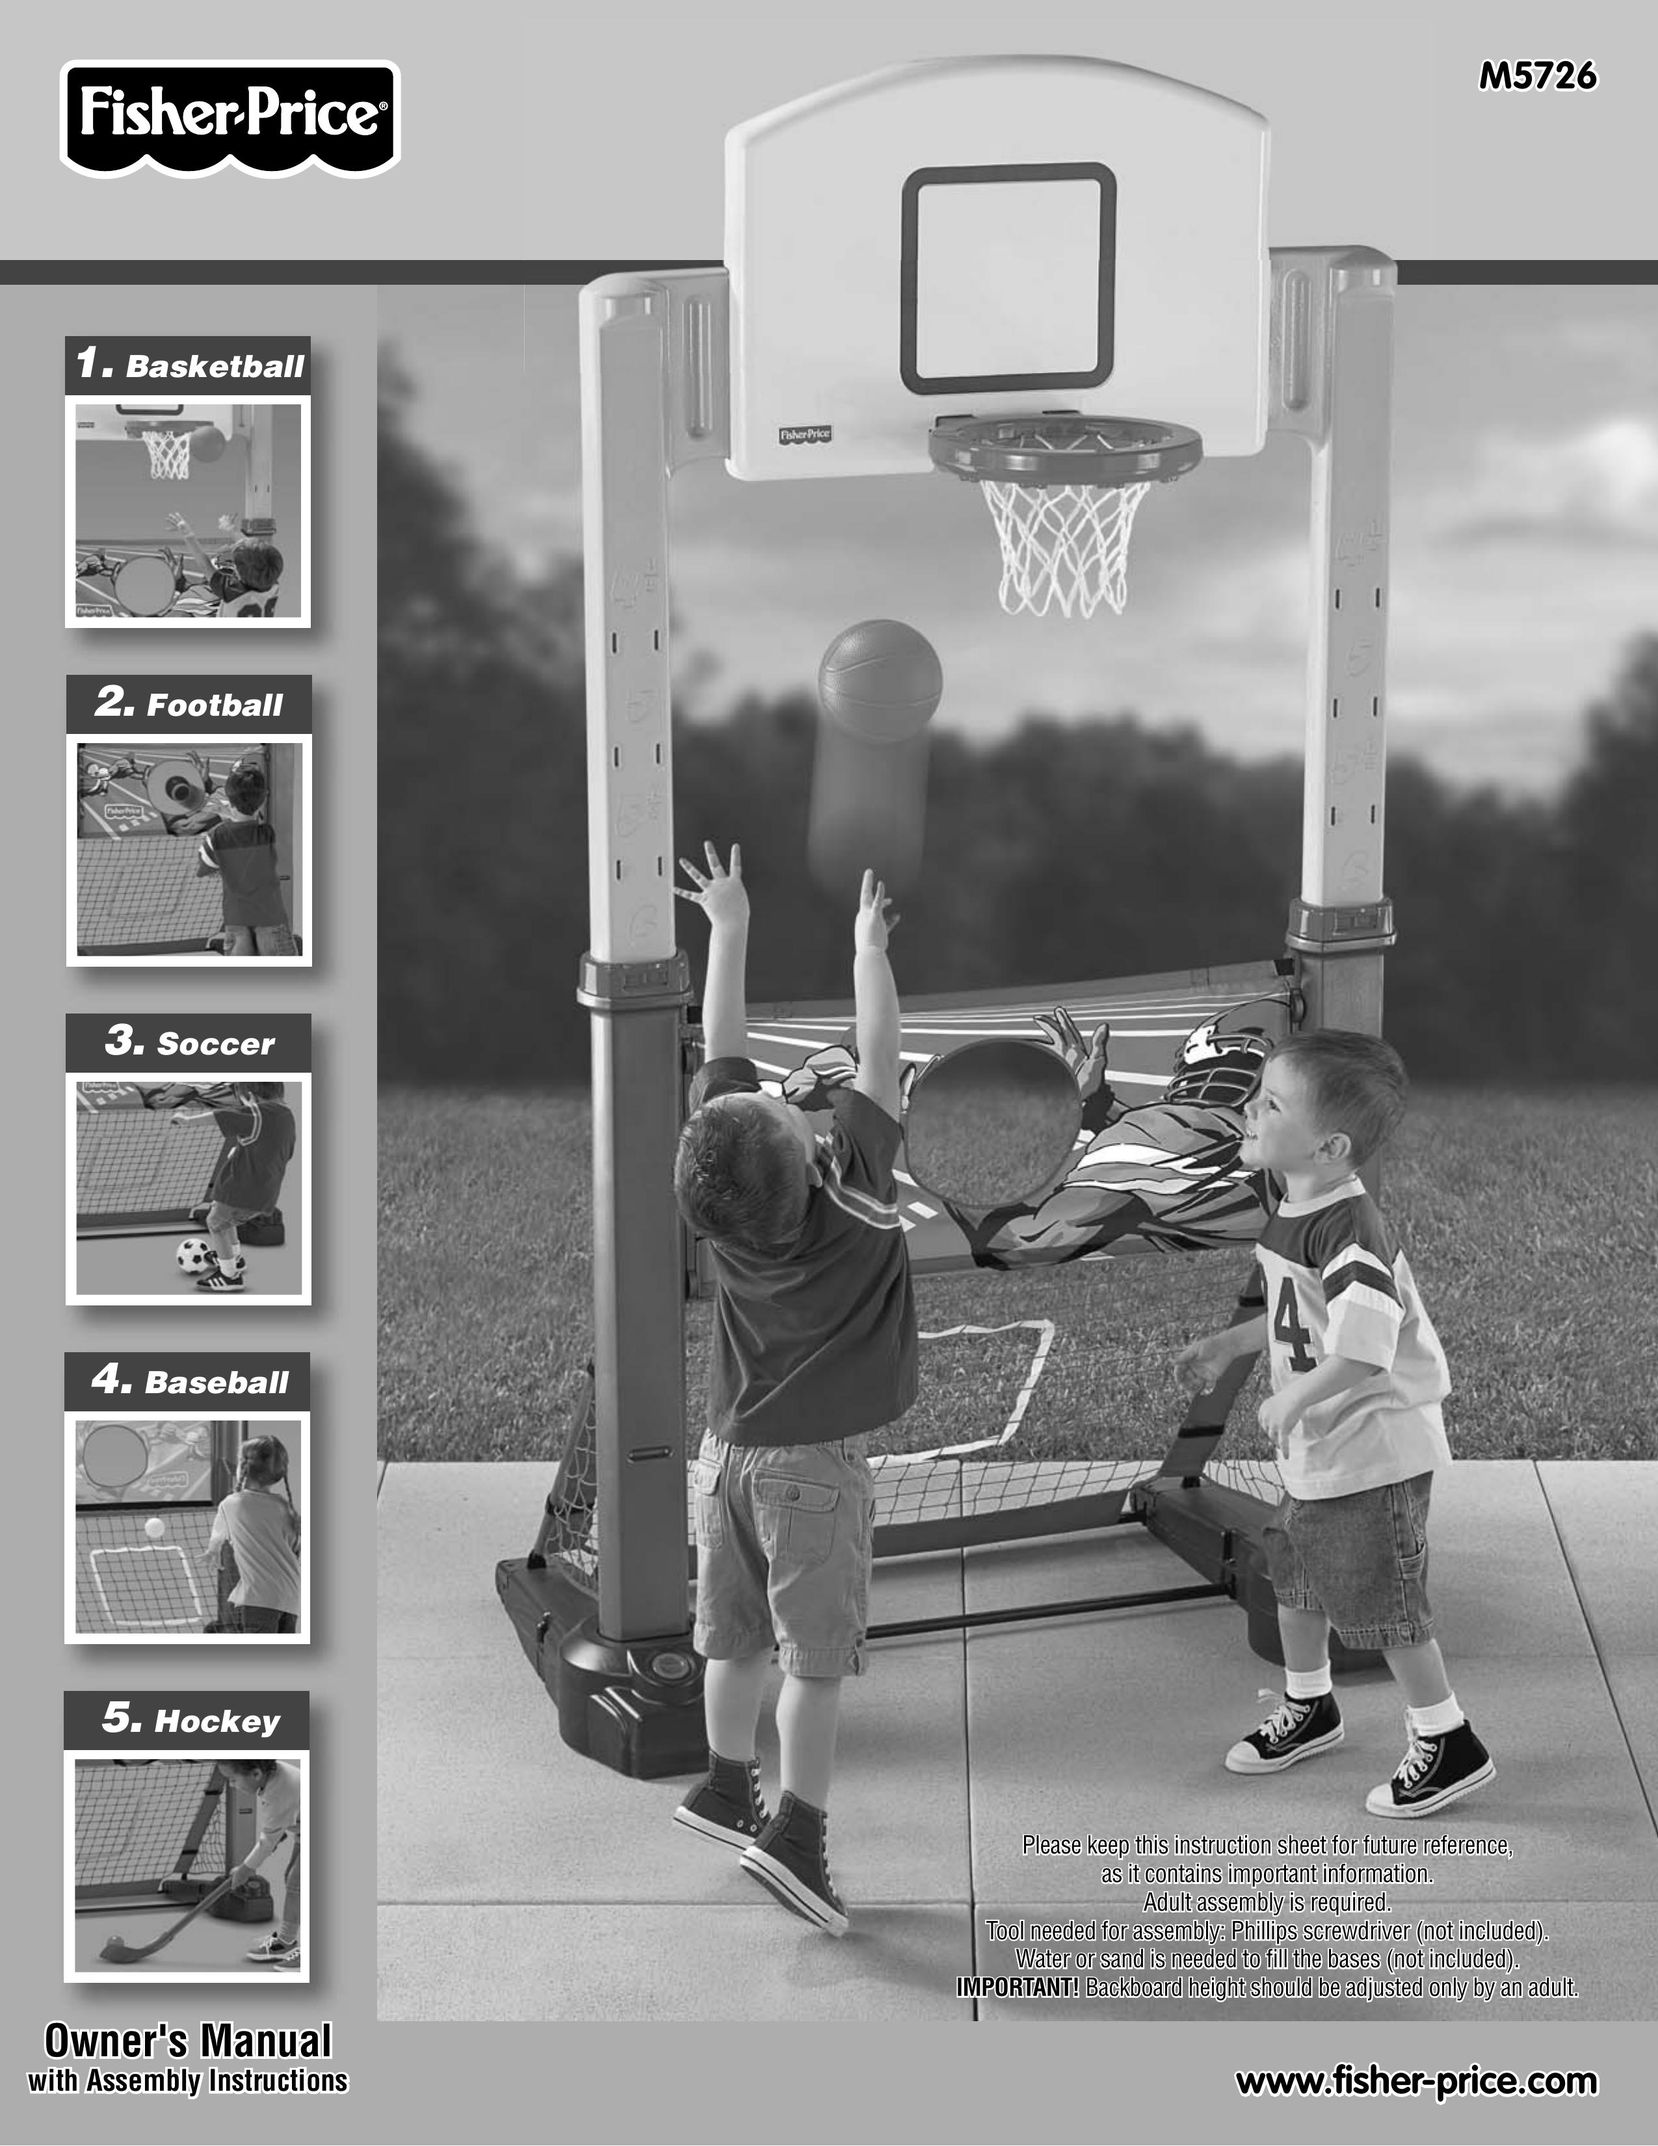 Fisher-Price M5726 Fitness Equipment User Manual (Page 1)